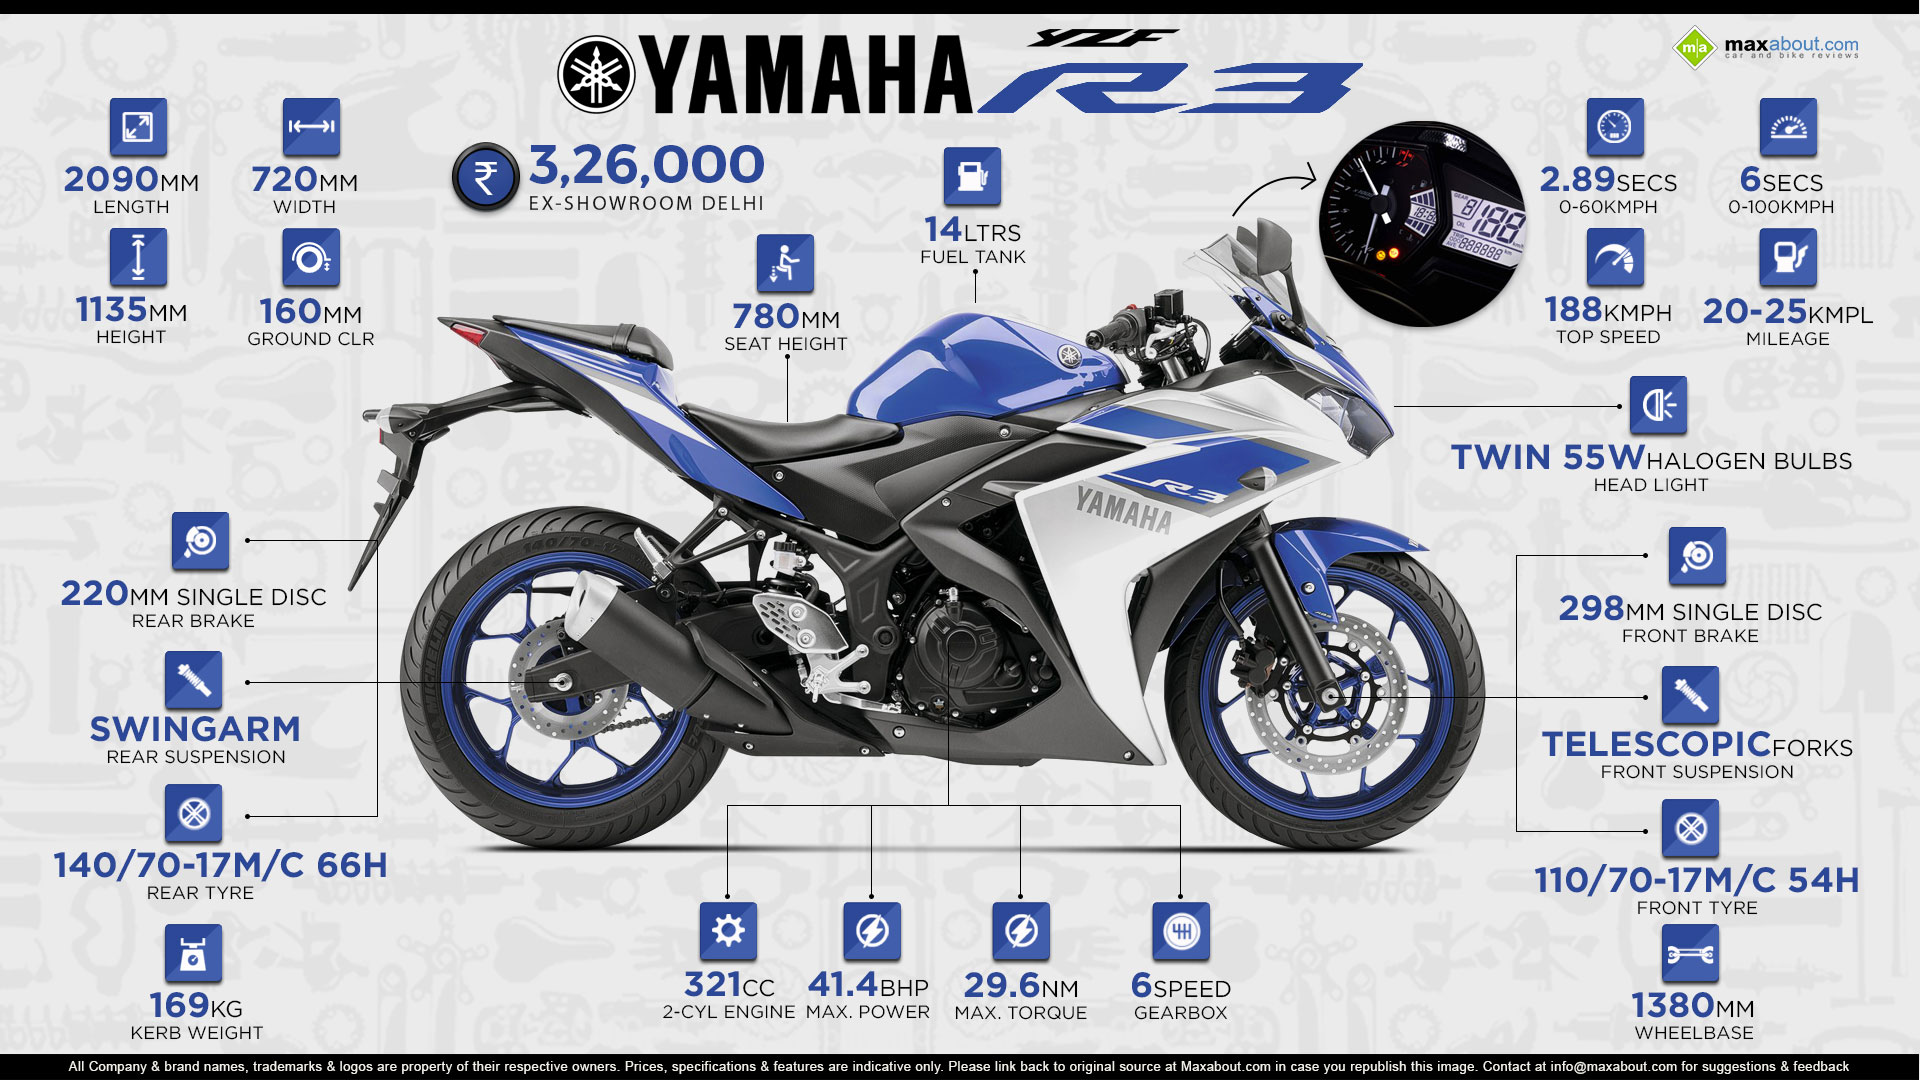 Gutter bandage Interessant Yamaha R3 - All You Need to Know